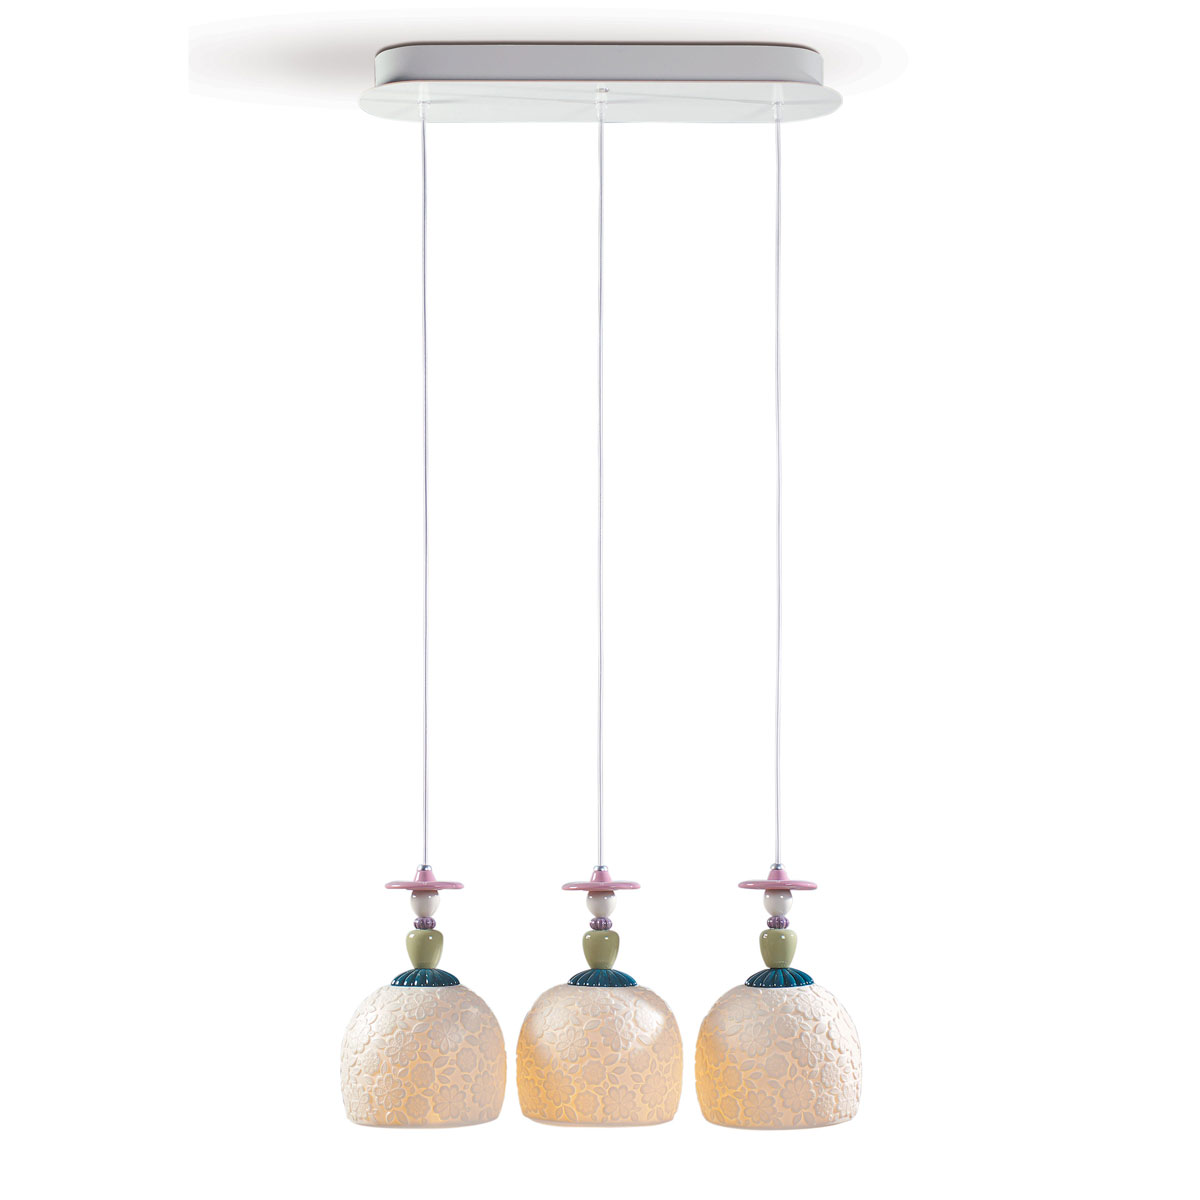 Lladro Classic Lighting, Mademoiselle Lineal Canopy 3 Lights Gazing At The Ocean Ceiling Lamp